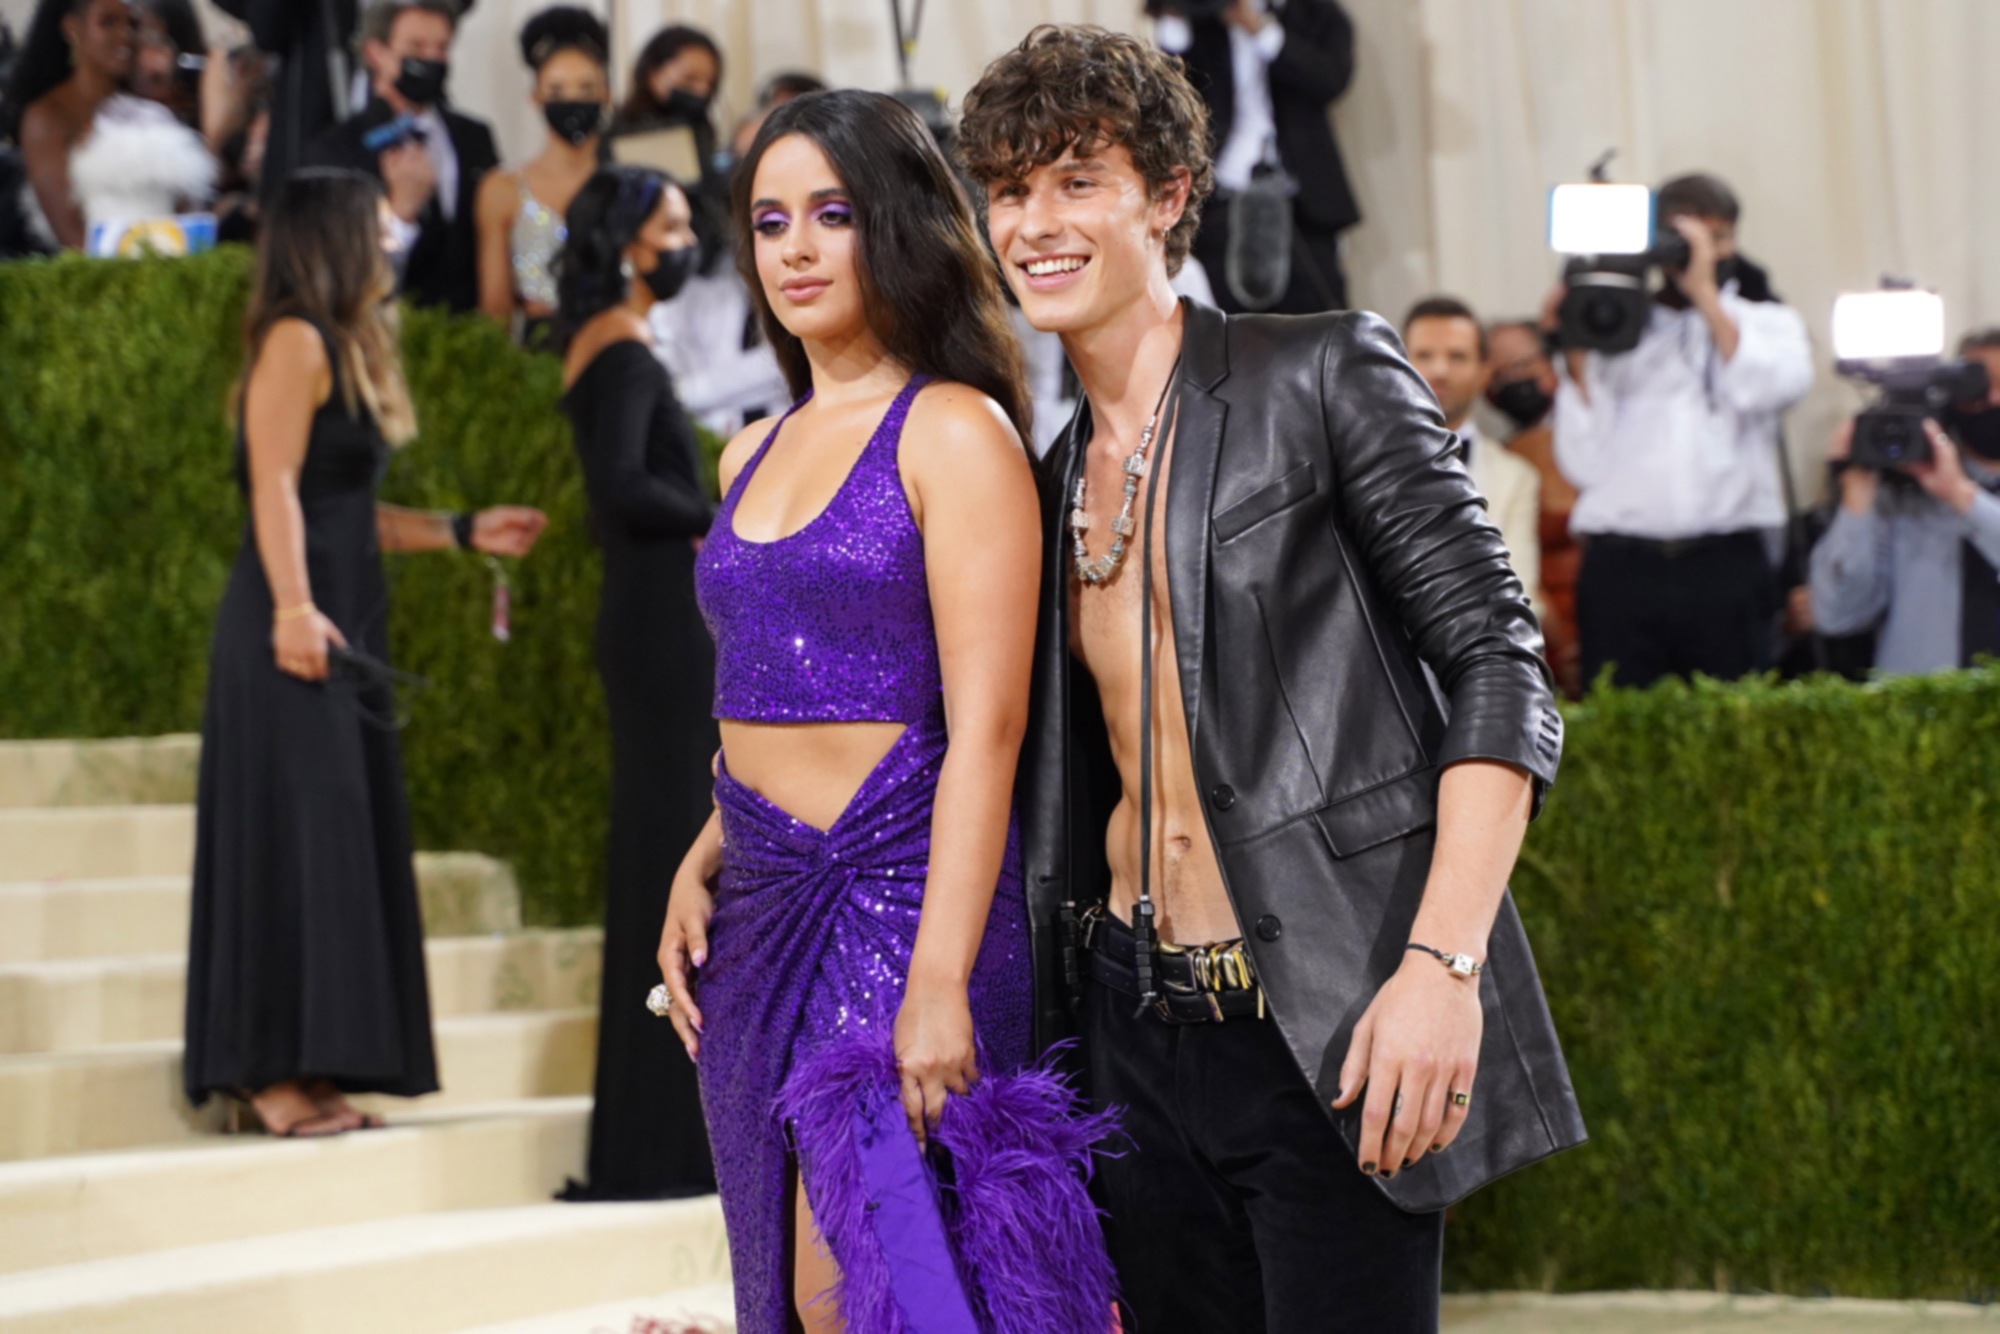 did shawn mendes and camila cabello break up